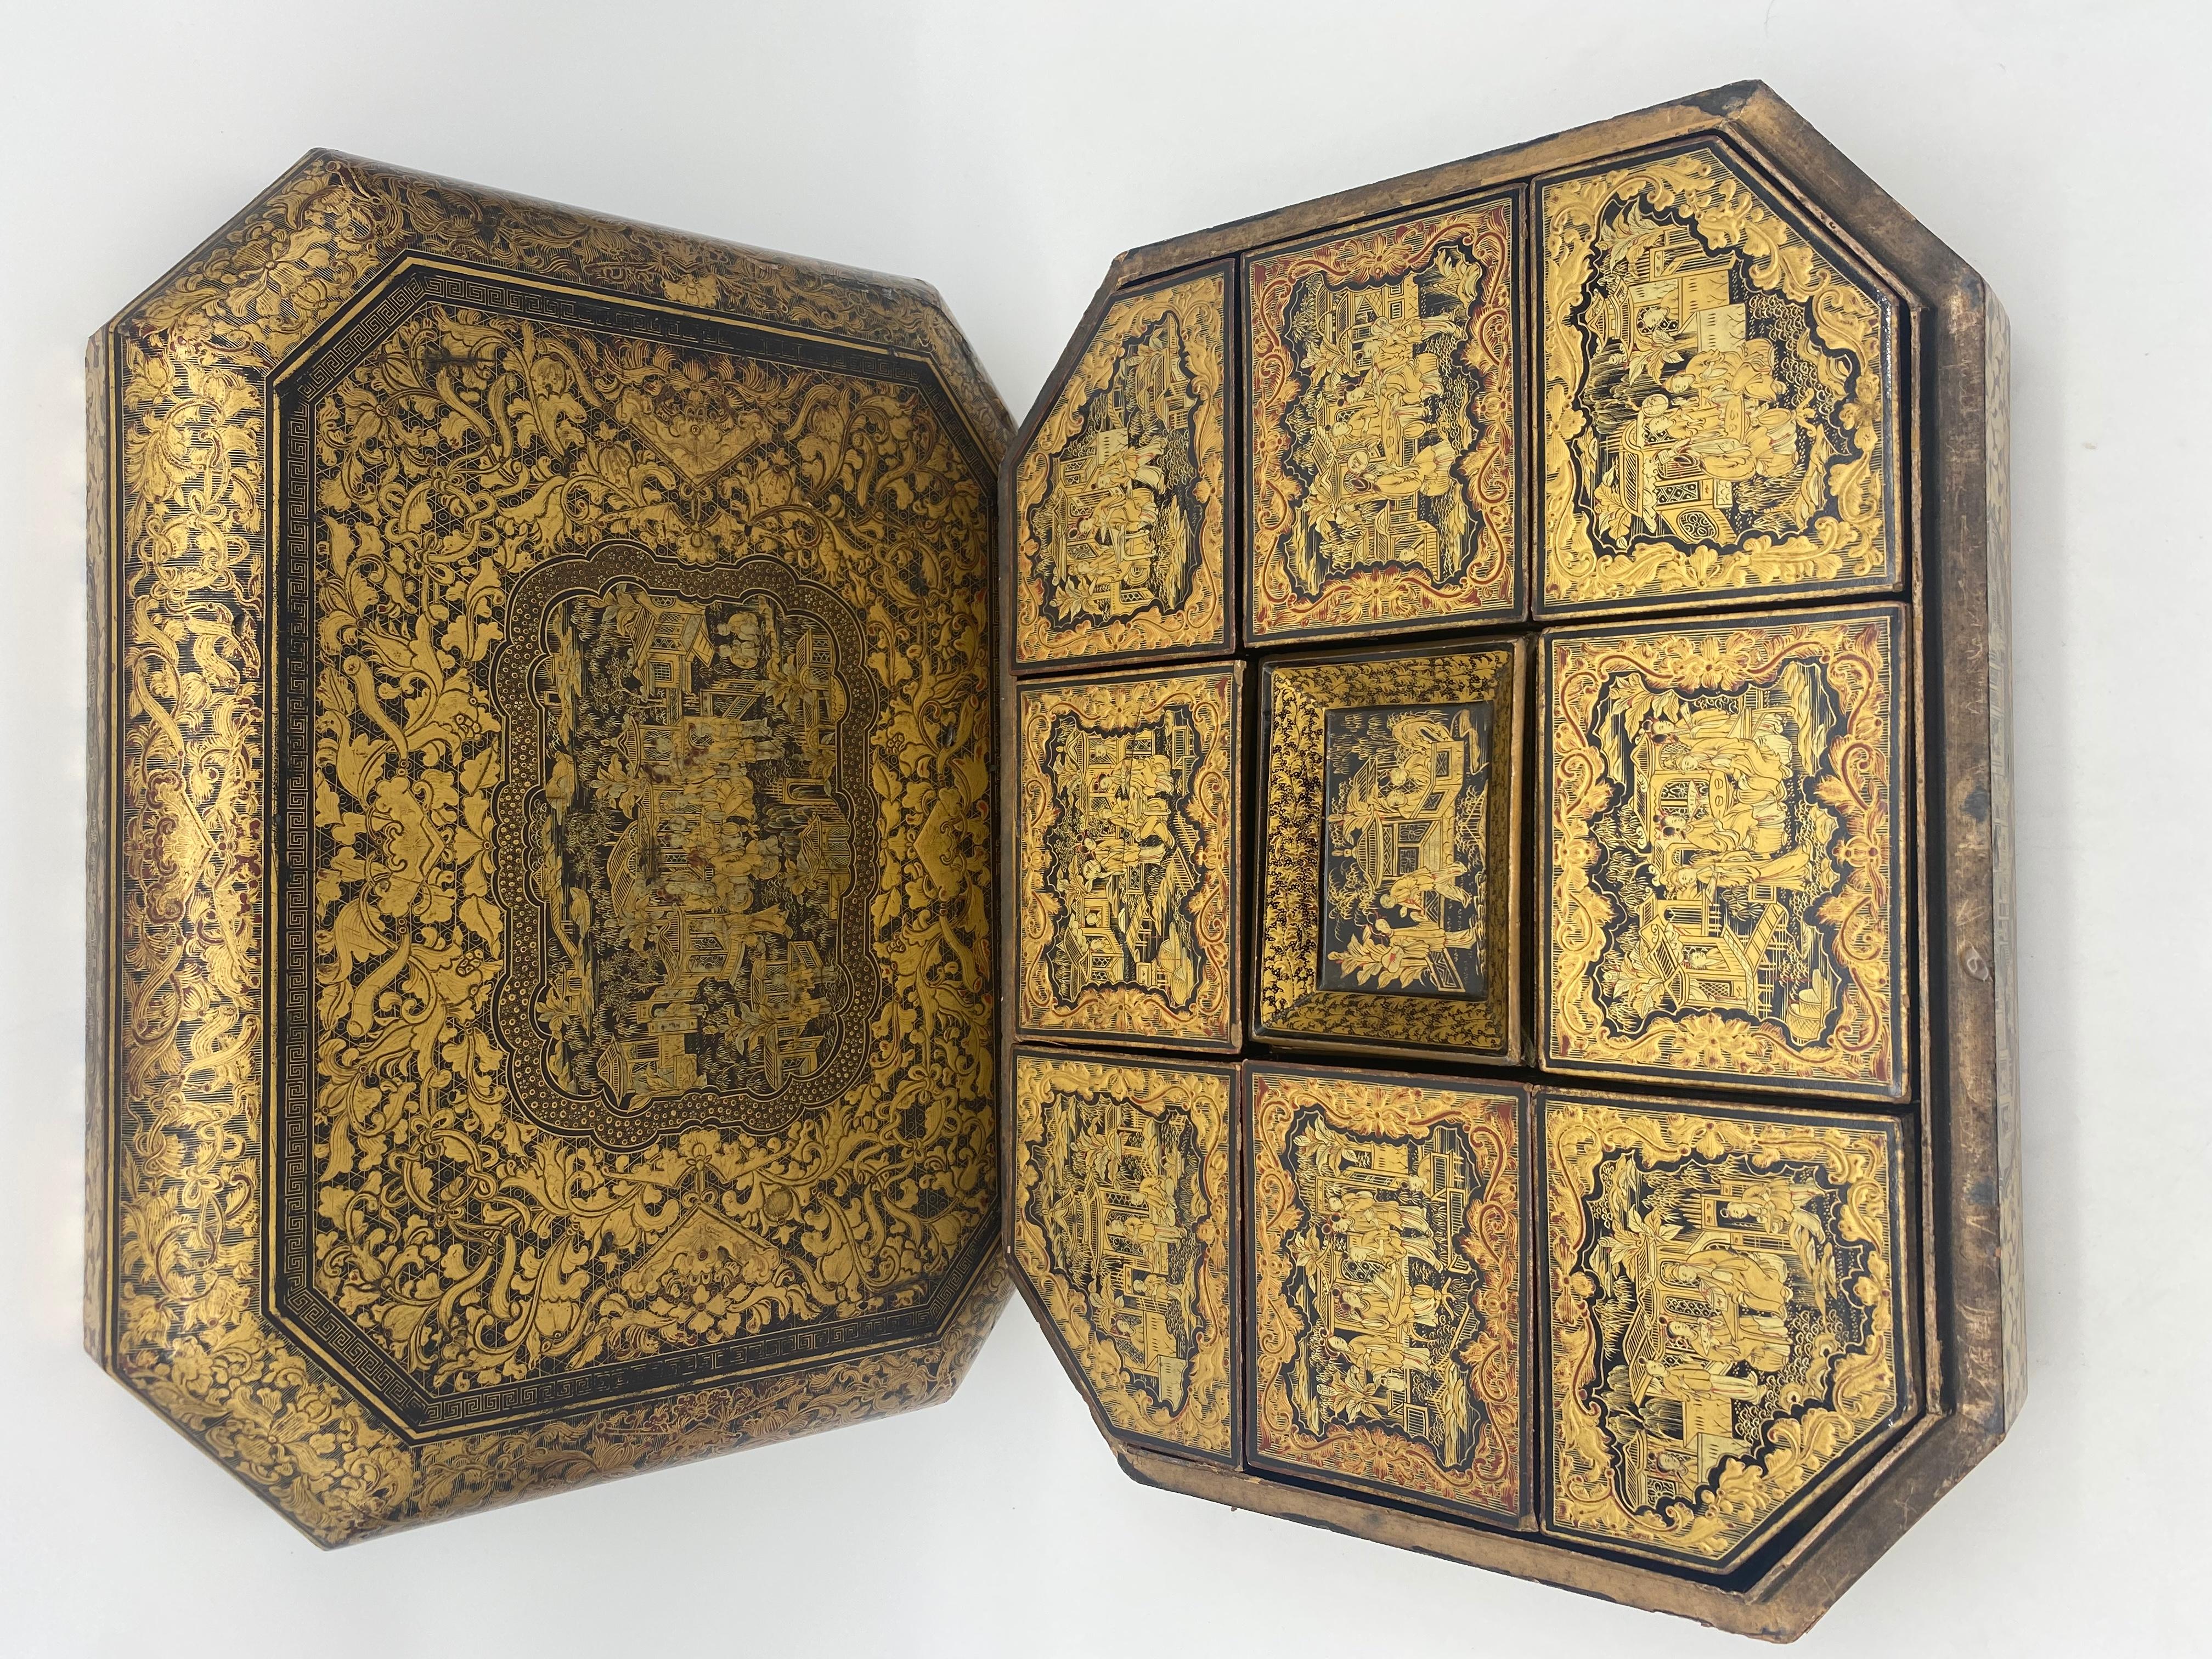 Antique 19th century export Chinese lacquer gaming box with hand painted scenes gilt export black lacquer, there are 8 gaming boxes and 6 trays, highly detailed Chinese gilt chinoiserie lacquer compartment box, the lid lifts off and the box has nine